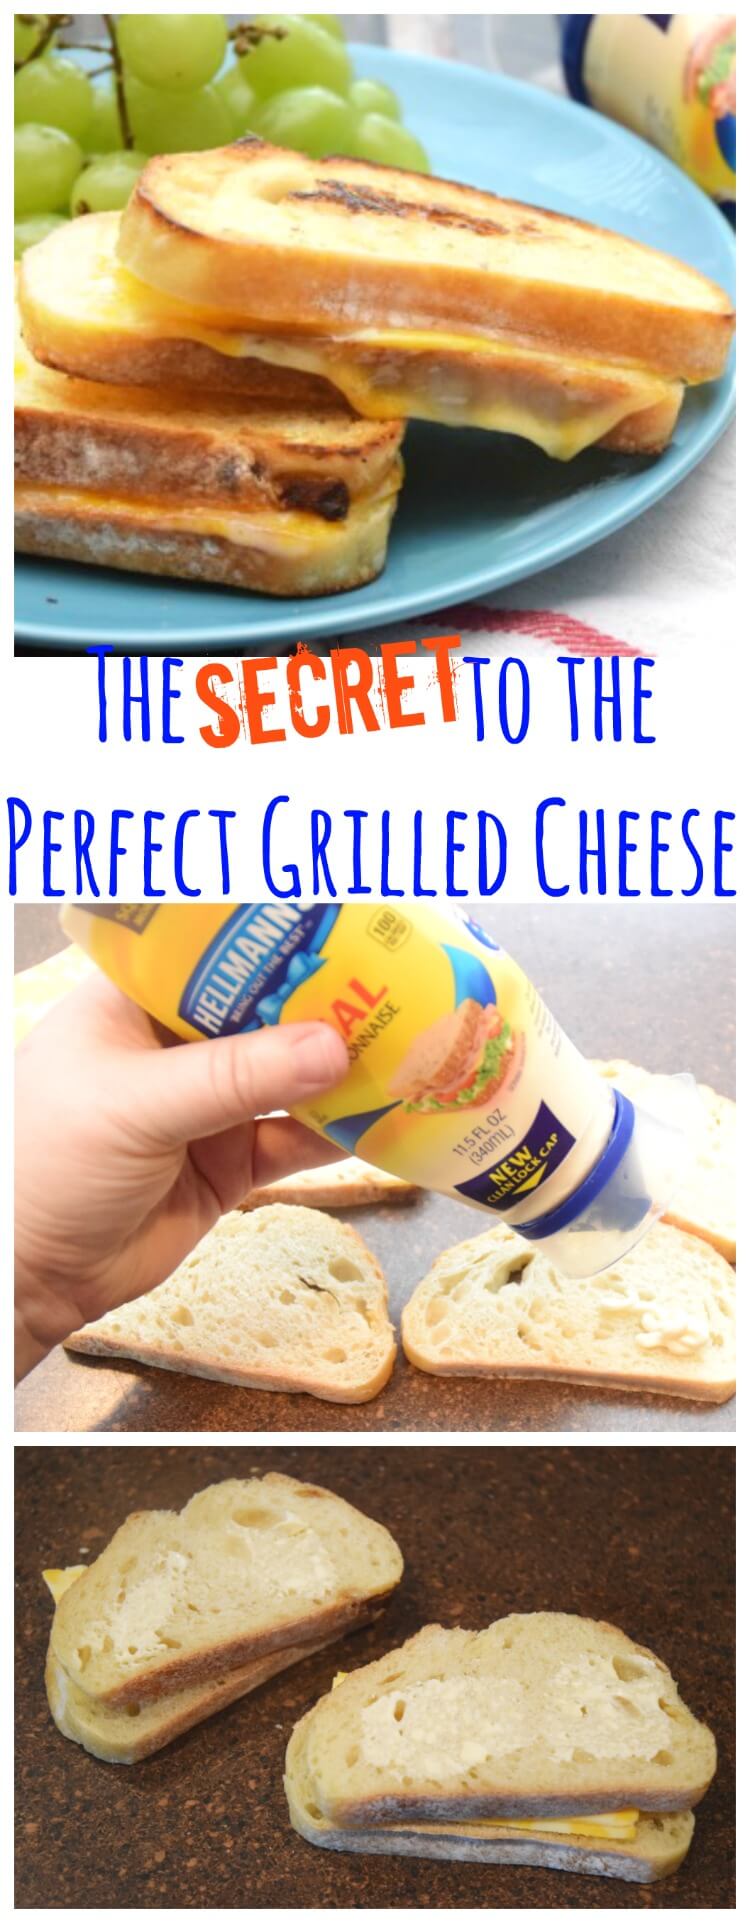 #MakeMoreofMealtime w/ Hellmann's for the perfect grilled cheese! #ad #food #yum